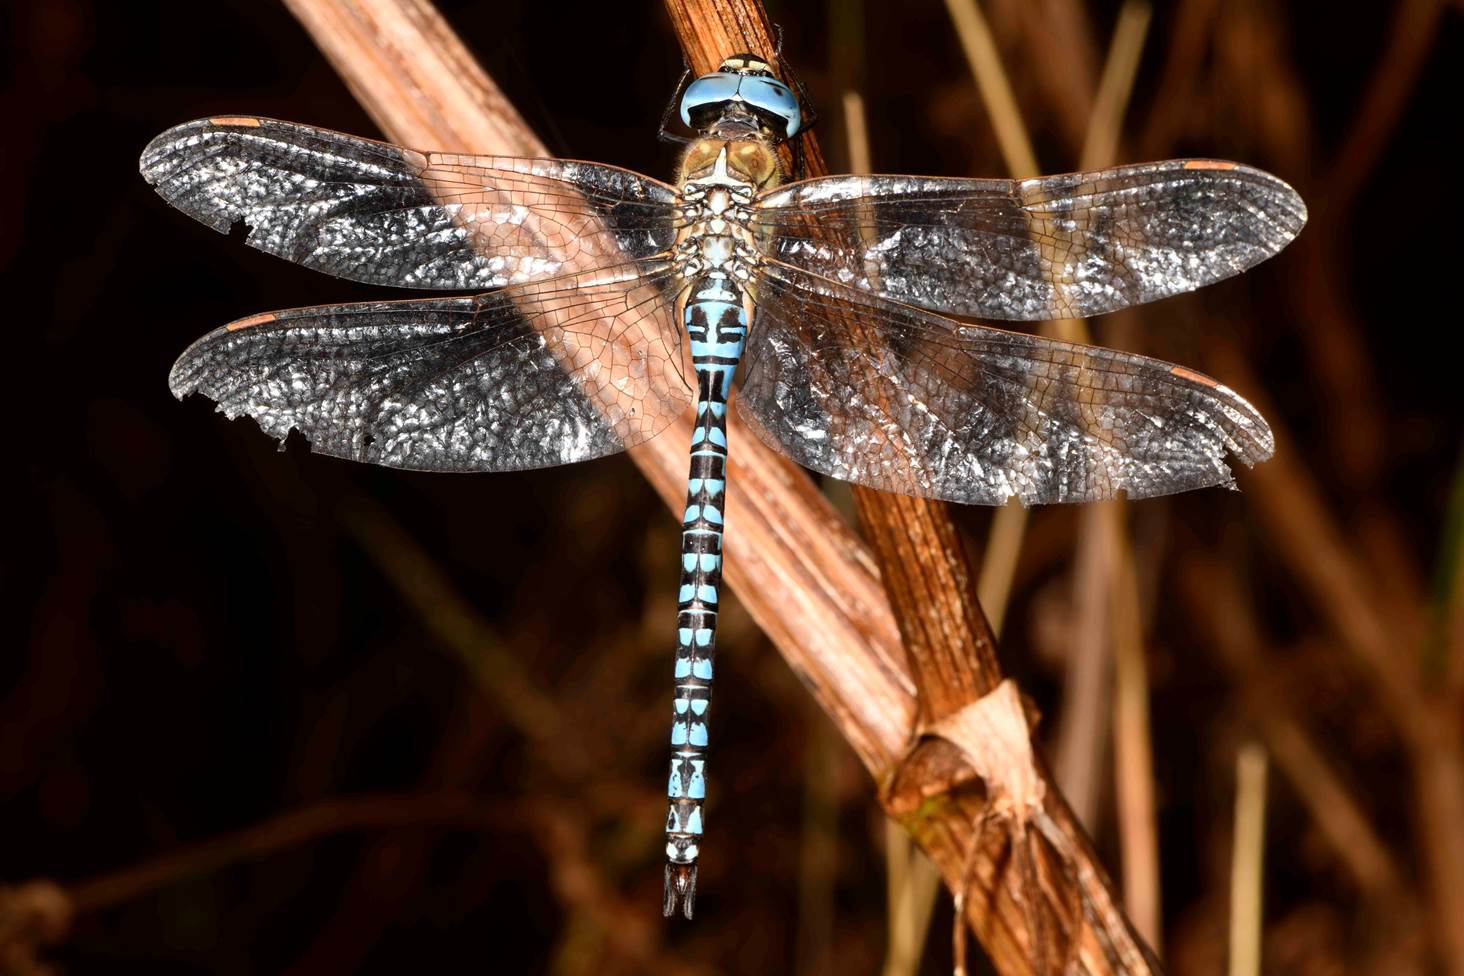 A dragonfly with wings on a branch

Description automatically generated